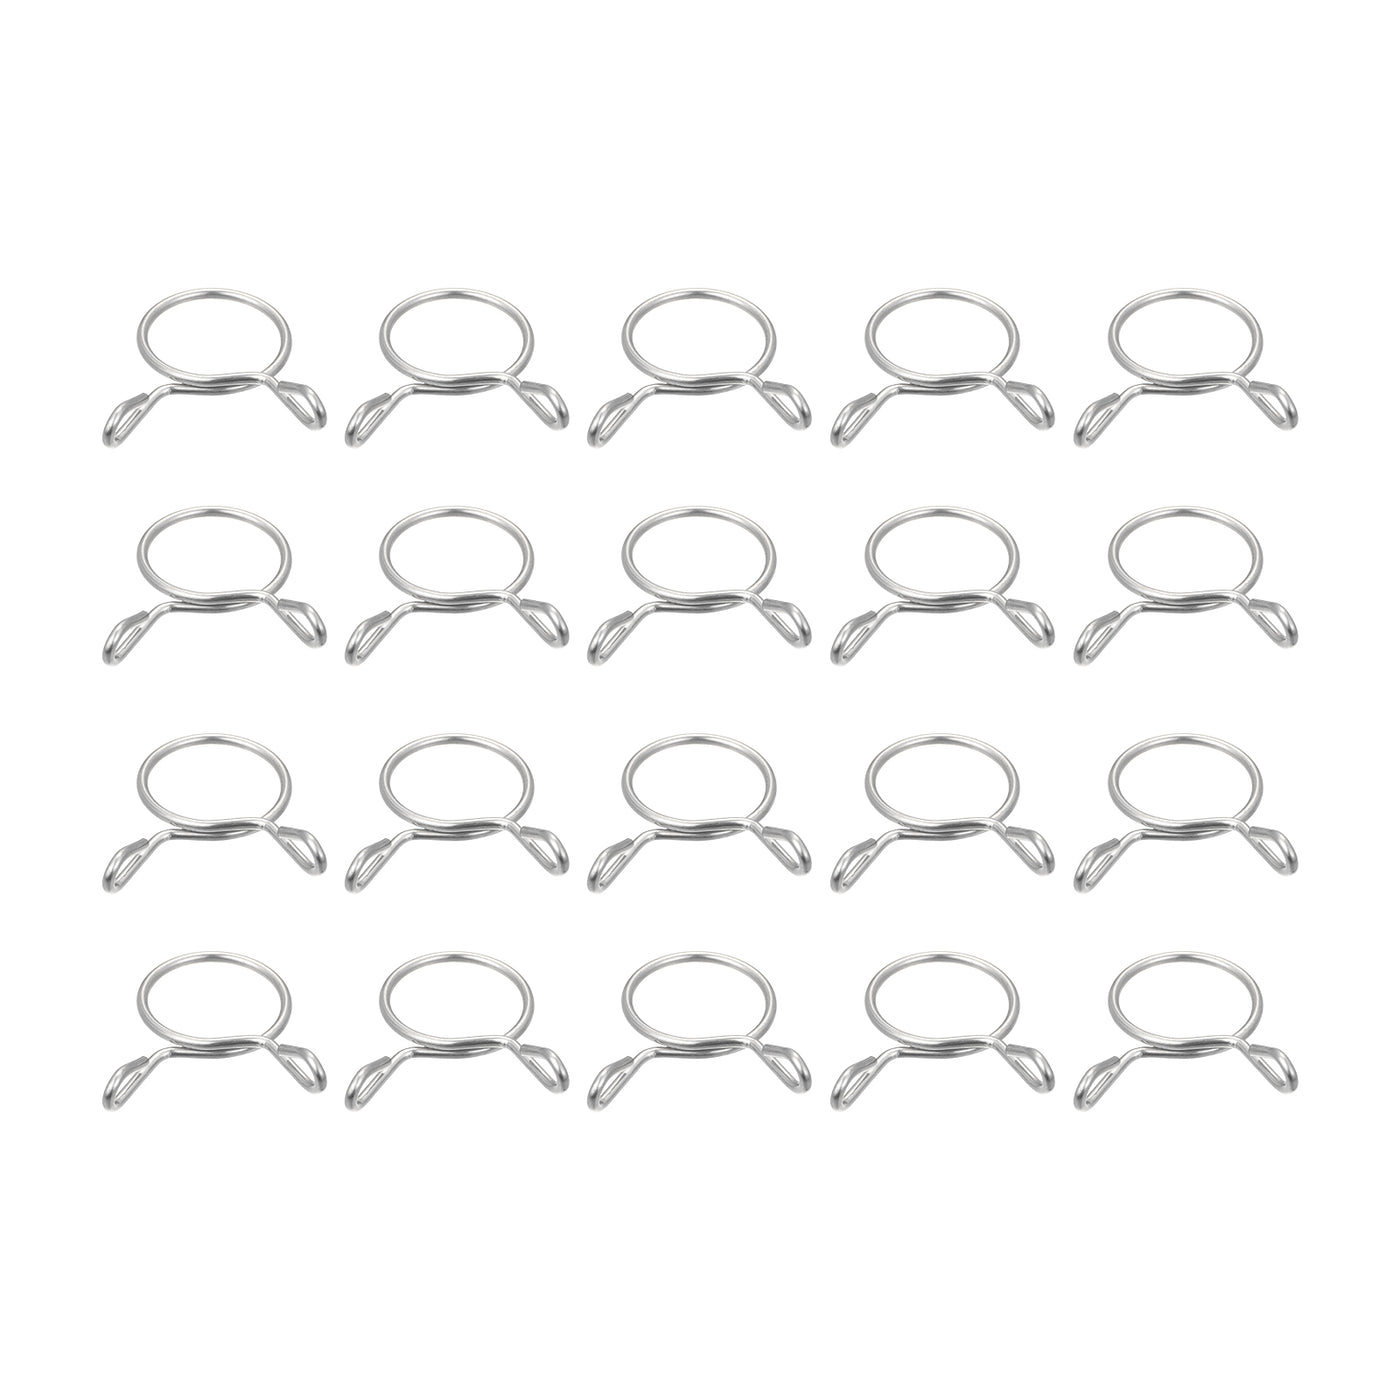 Uxcell Uxcell Fuel Line Hose Clips, 20pcs 26mm 304 Stainless Steel Tube Spring Clamps(Silver)